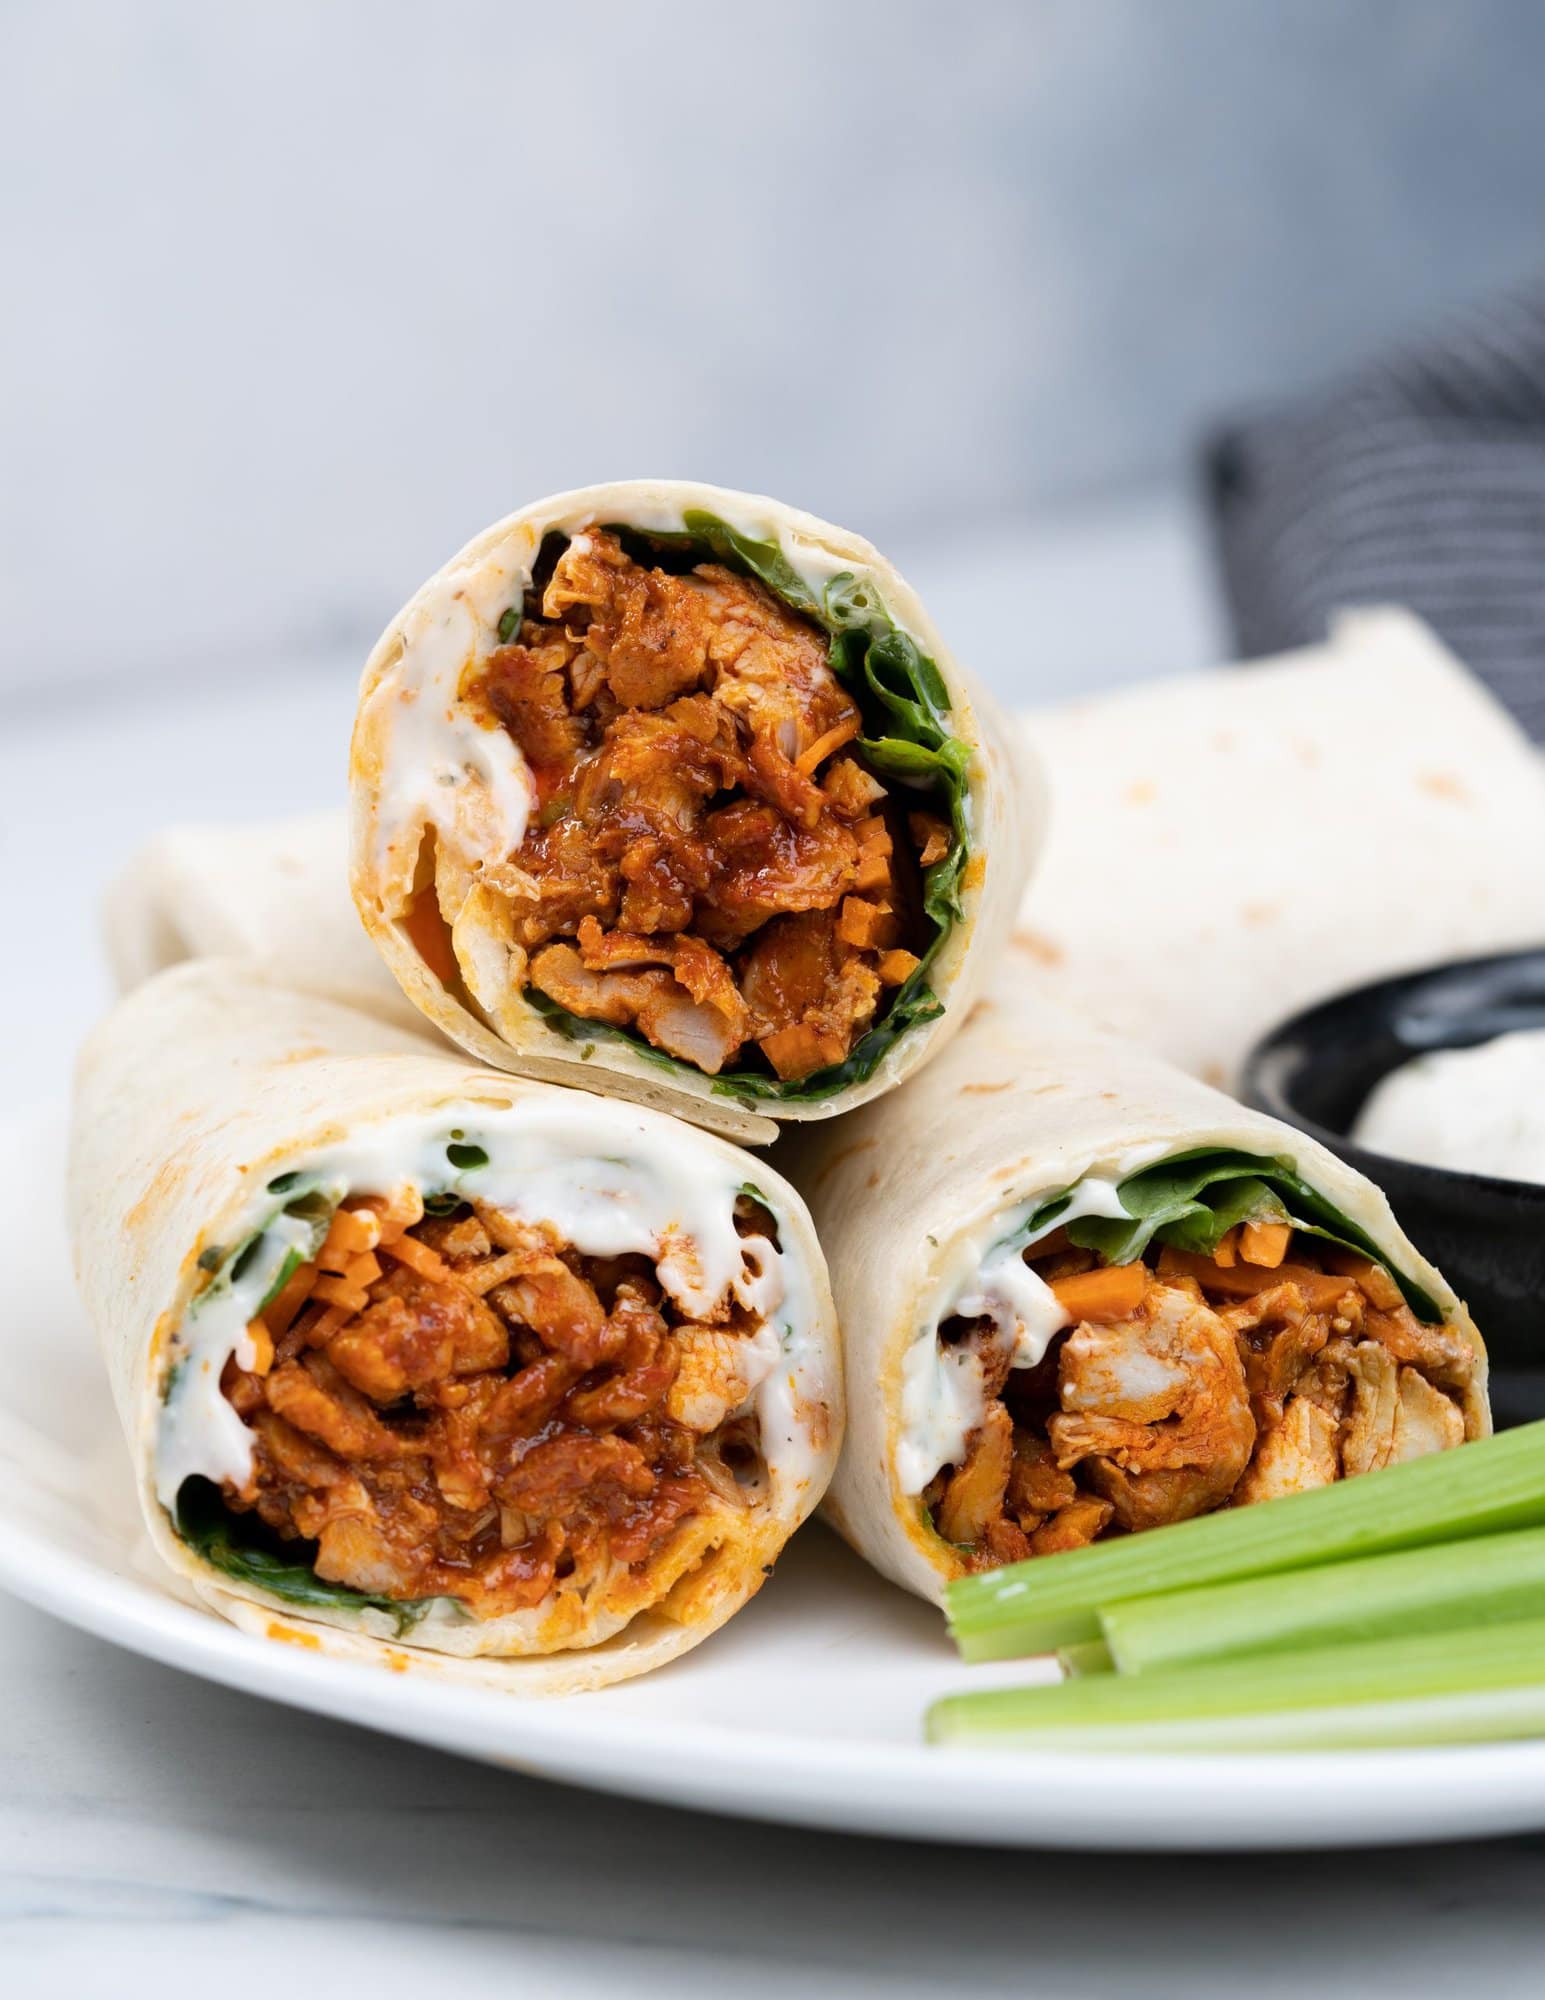 Tortilla wraps filled with juicy buffalo chicken, carrots, salad greens and then topped with creamy ranch dressing.